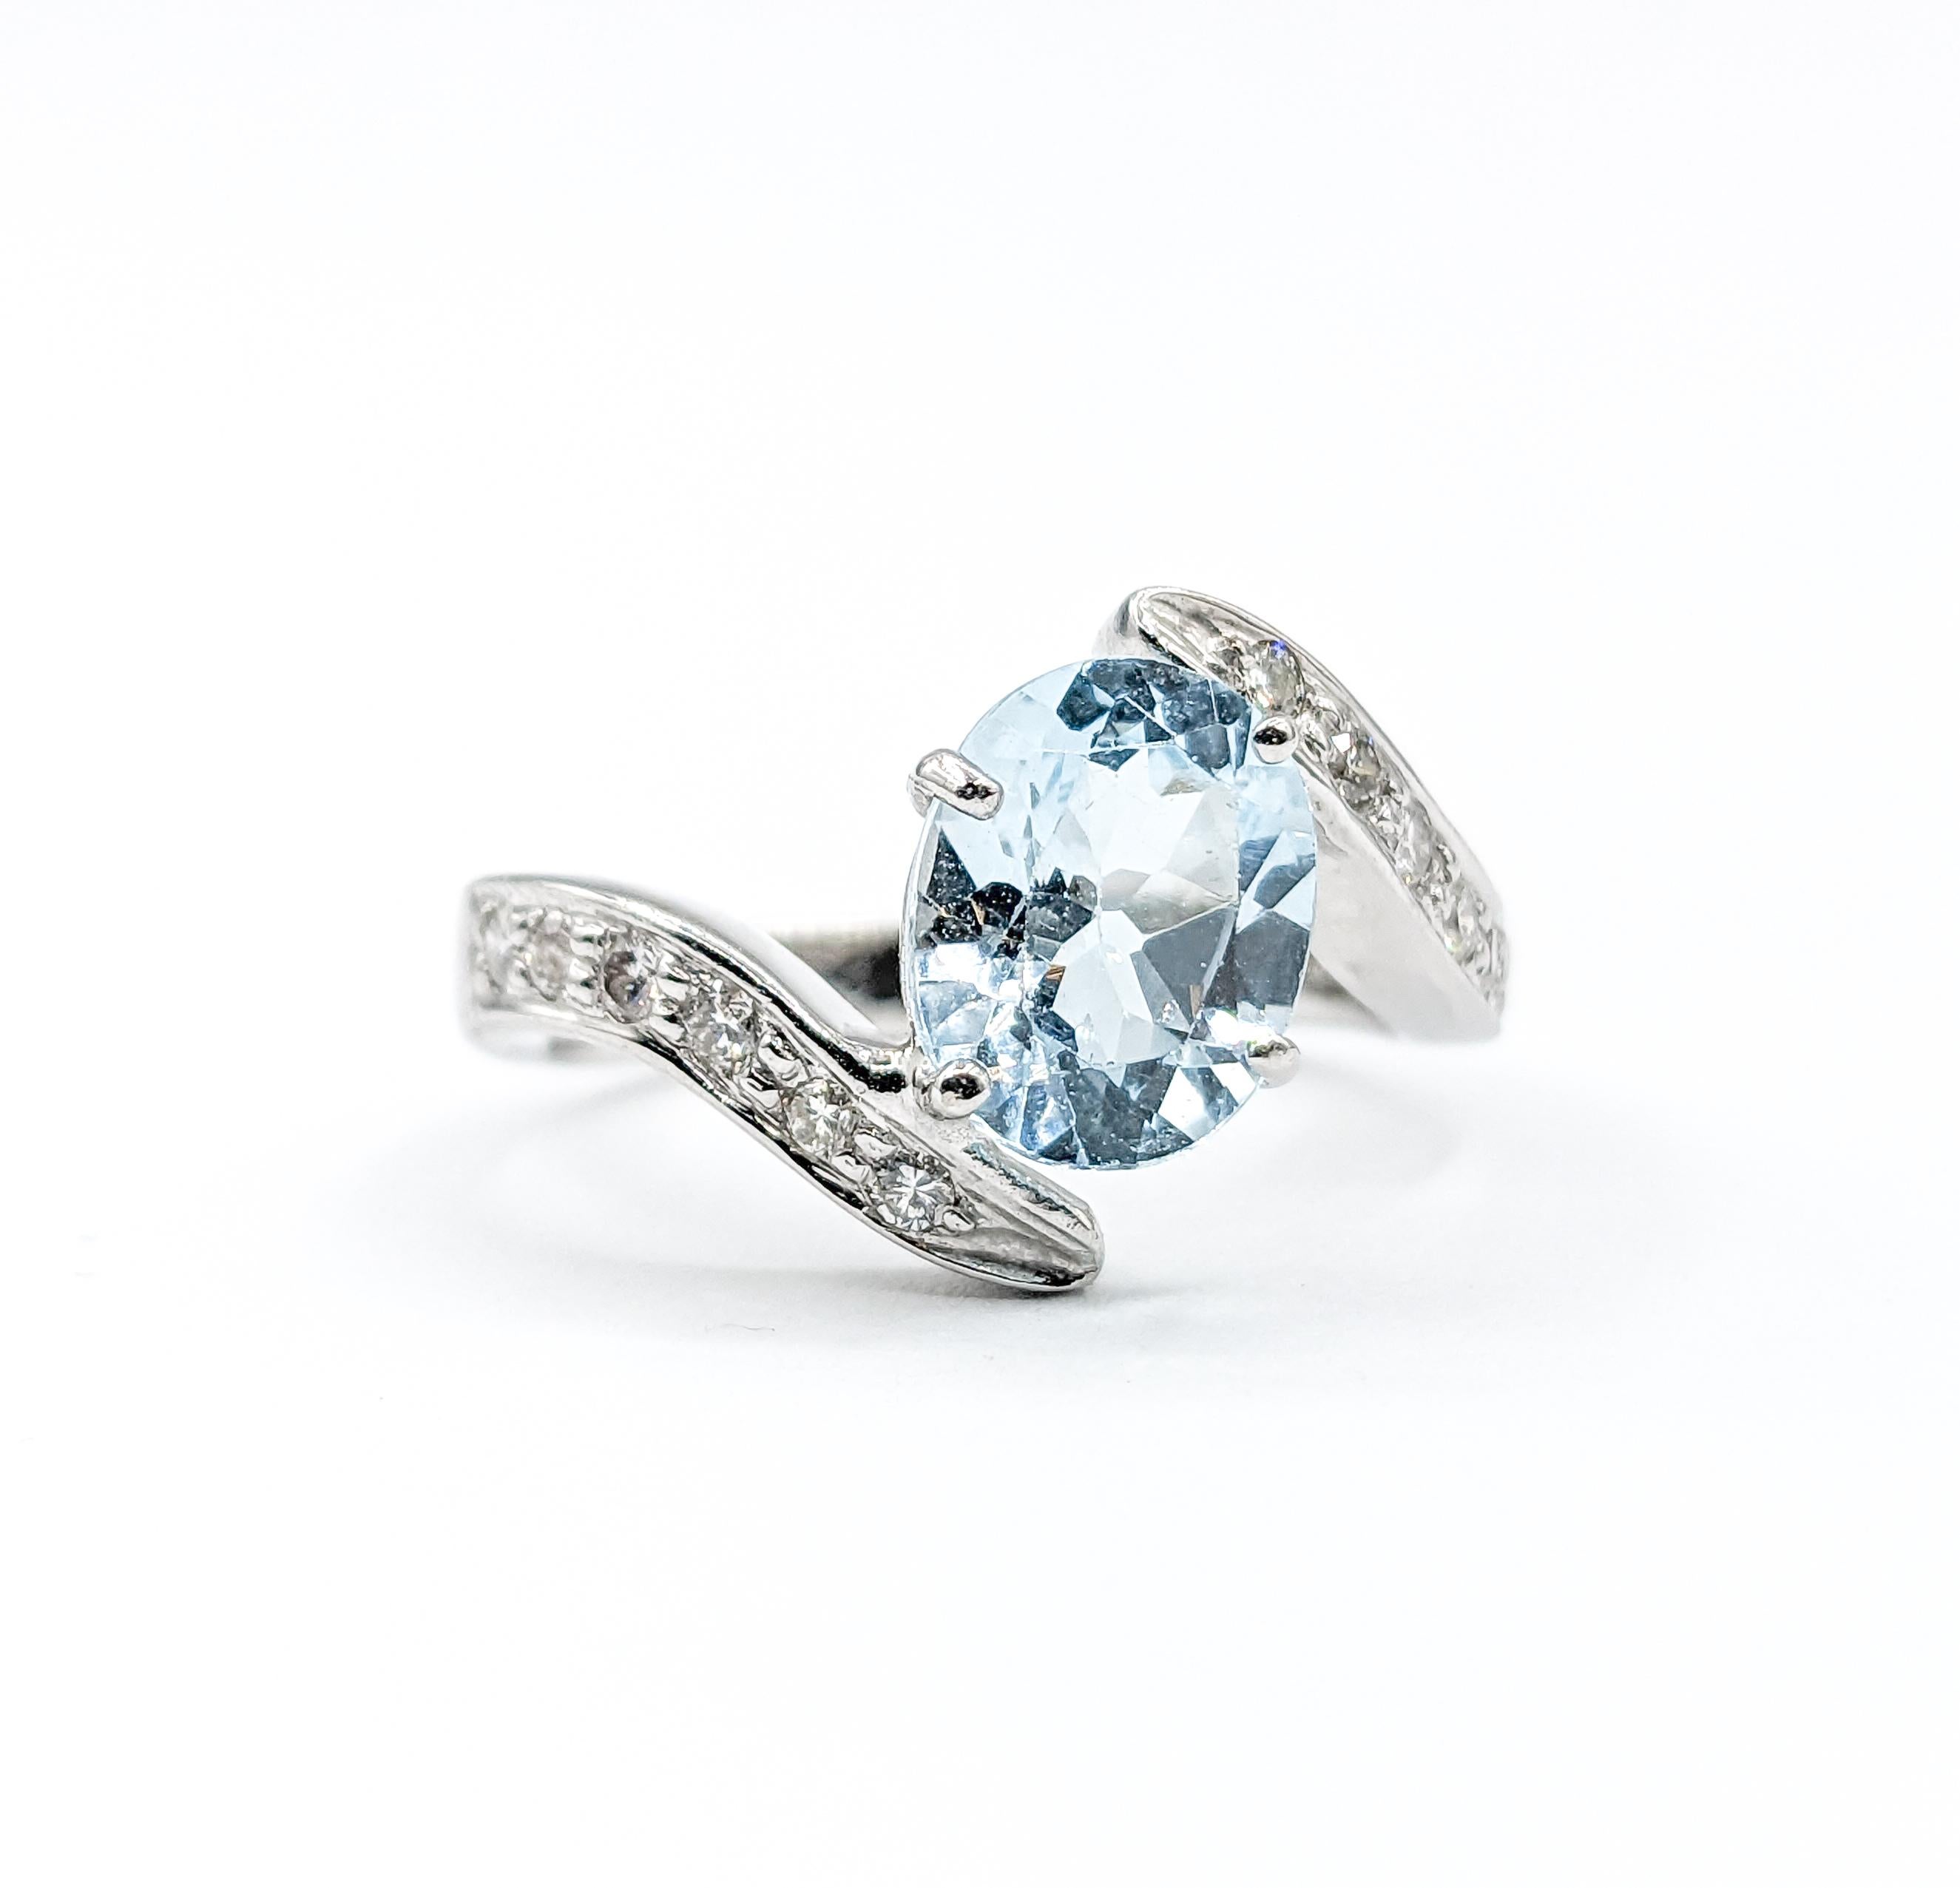 Unique Bypass Aquamarine & Diamond Ring in White Gold In Excellent Condition For Sale In Bloomington, MN